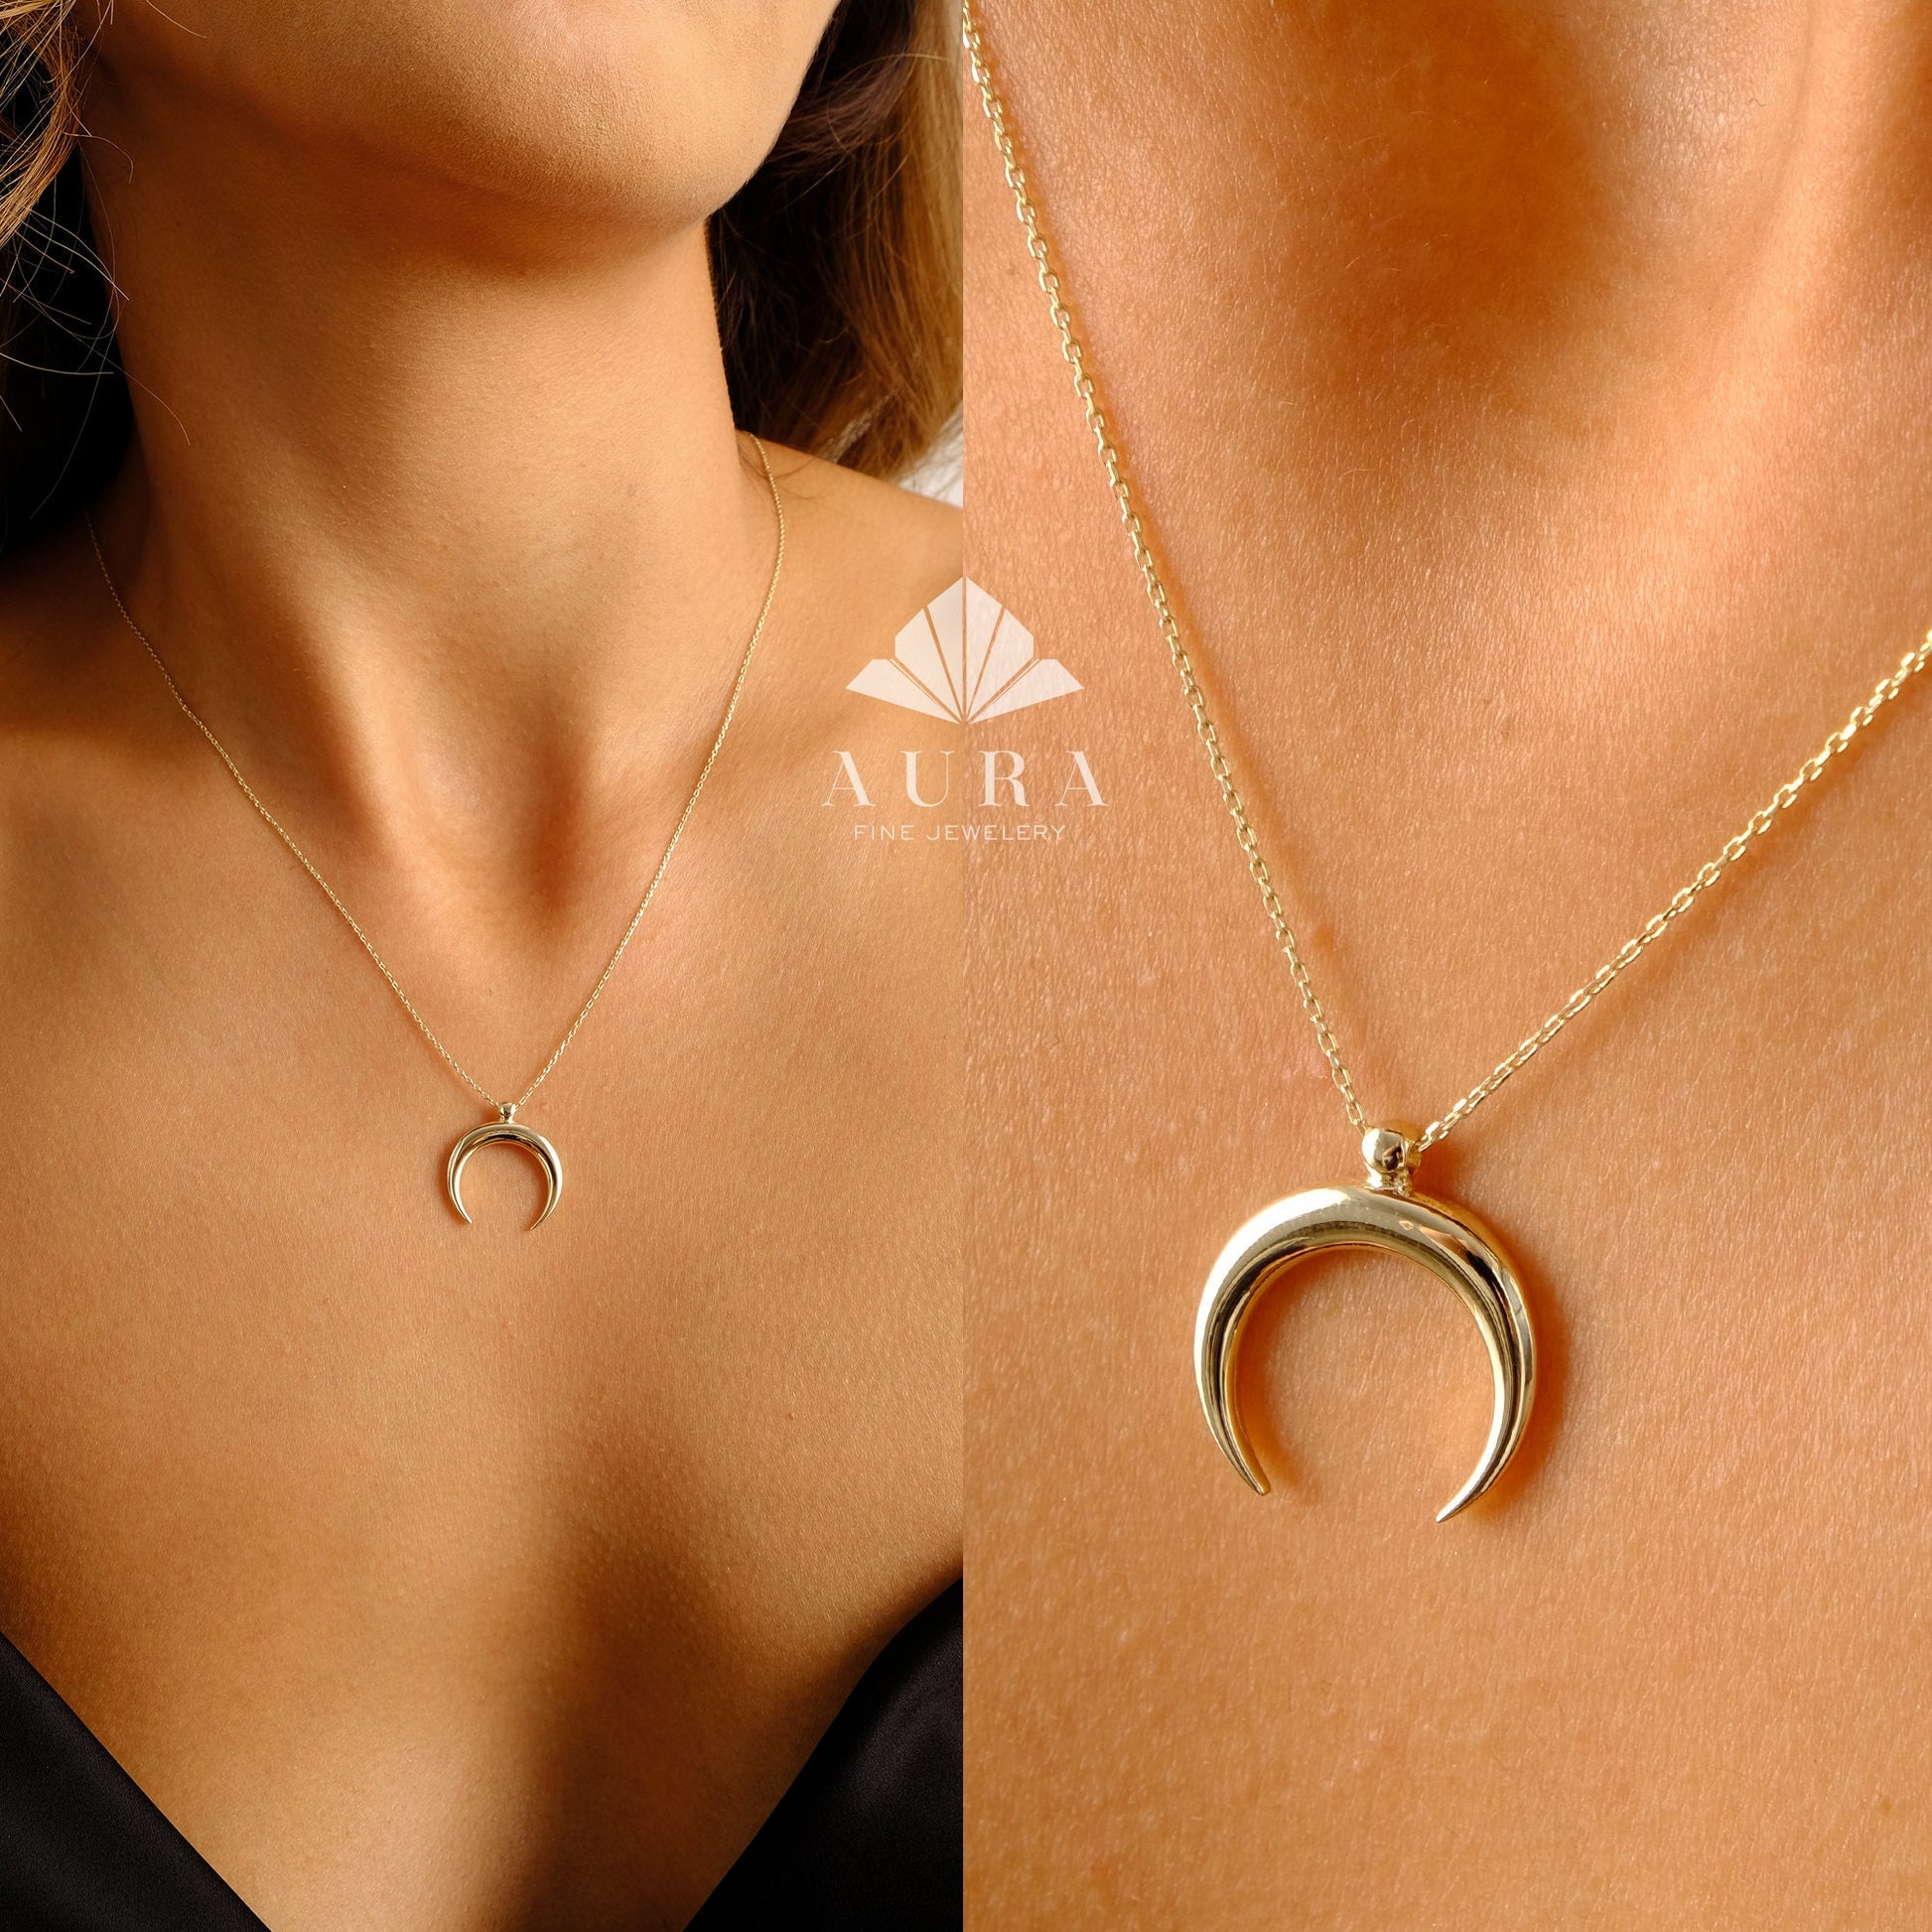 14K Gold Crescent Moon Necklace, Gold Horn Charm Pendant, Dainty Gold Necklace, Moon Charm Necklace, Double Horn Necklace, Gift for Her